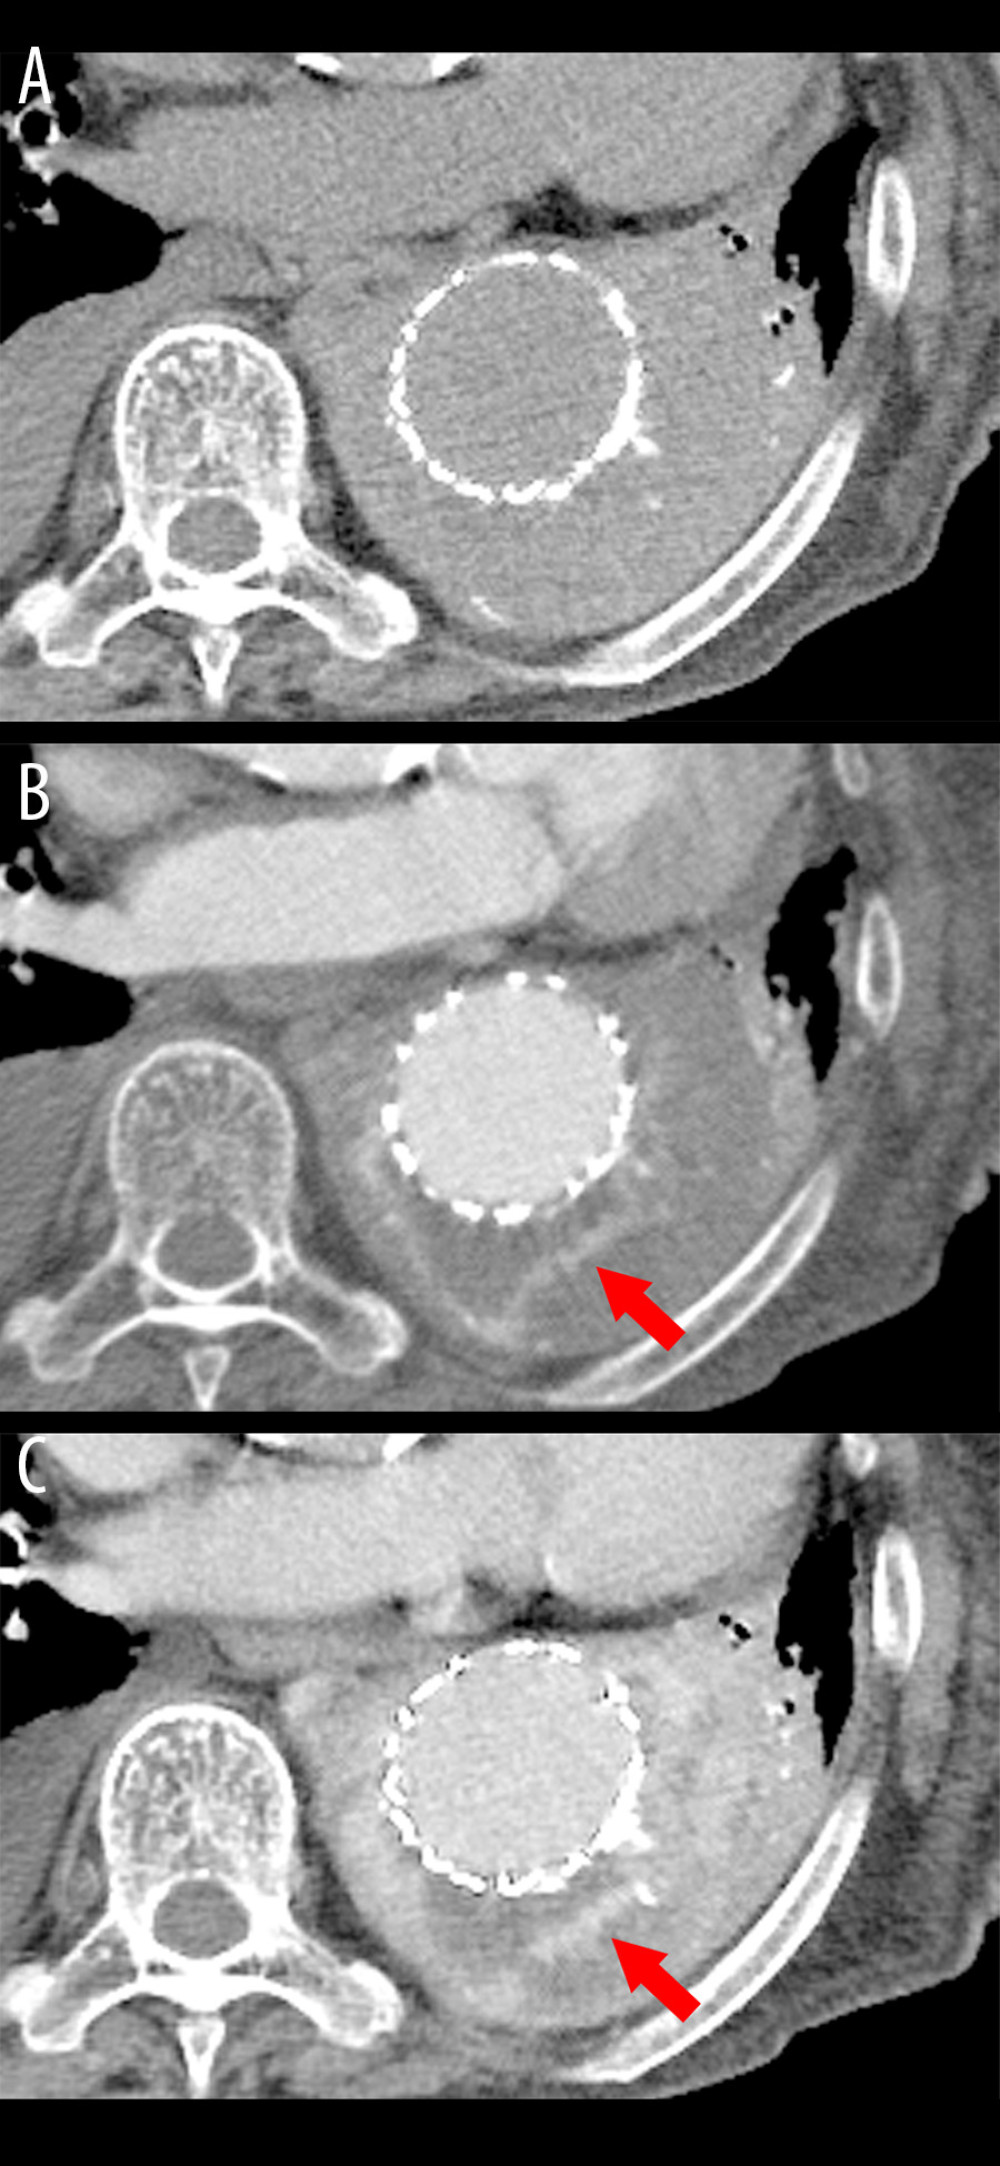 (A) Non-contrast, (B) arterial-phase, and (C) delayed post-contrast computed tomography images. They showed a crescent-shaped aortic aneurysm with endoleak (red arrows), approximately 6 cm in size, surrounding the stent graft.